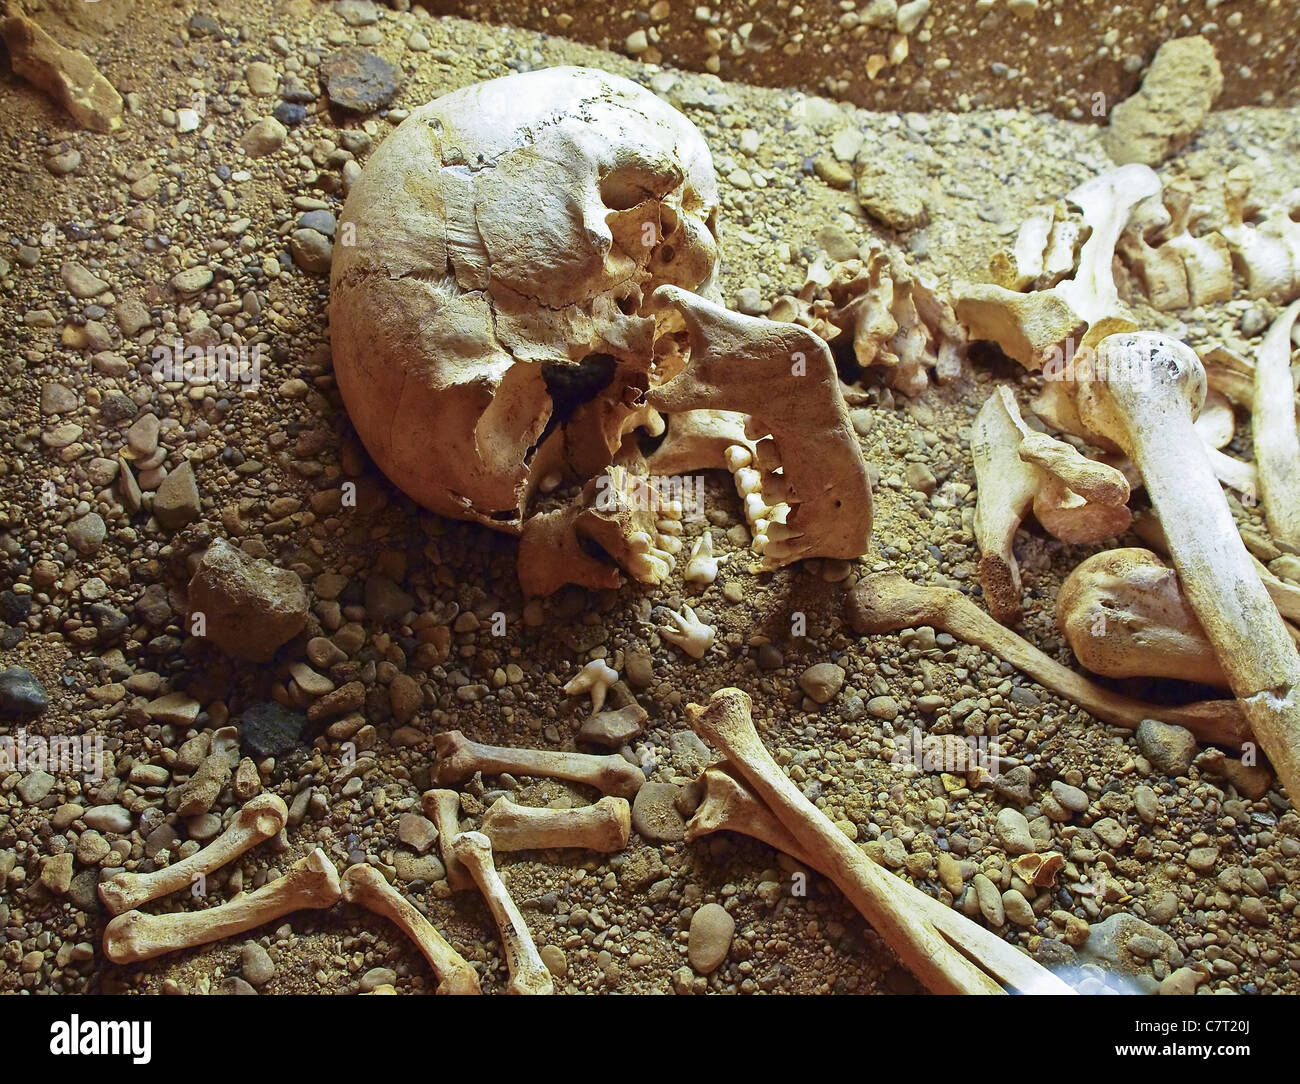 Human remains in the recreation of an archeological excavation, Pitt Rivers Museum, Oxford, England, UK, Europe. Stock Photo